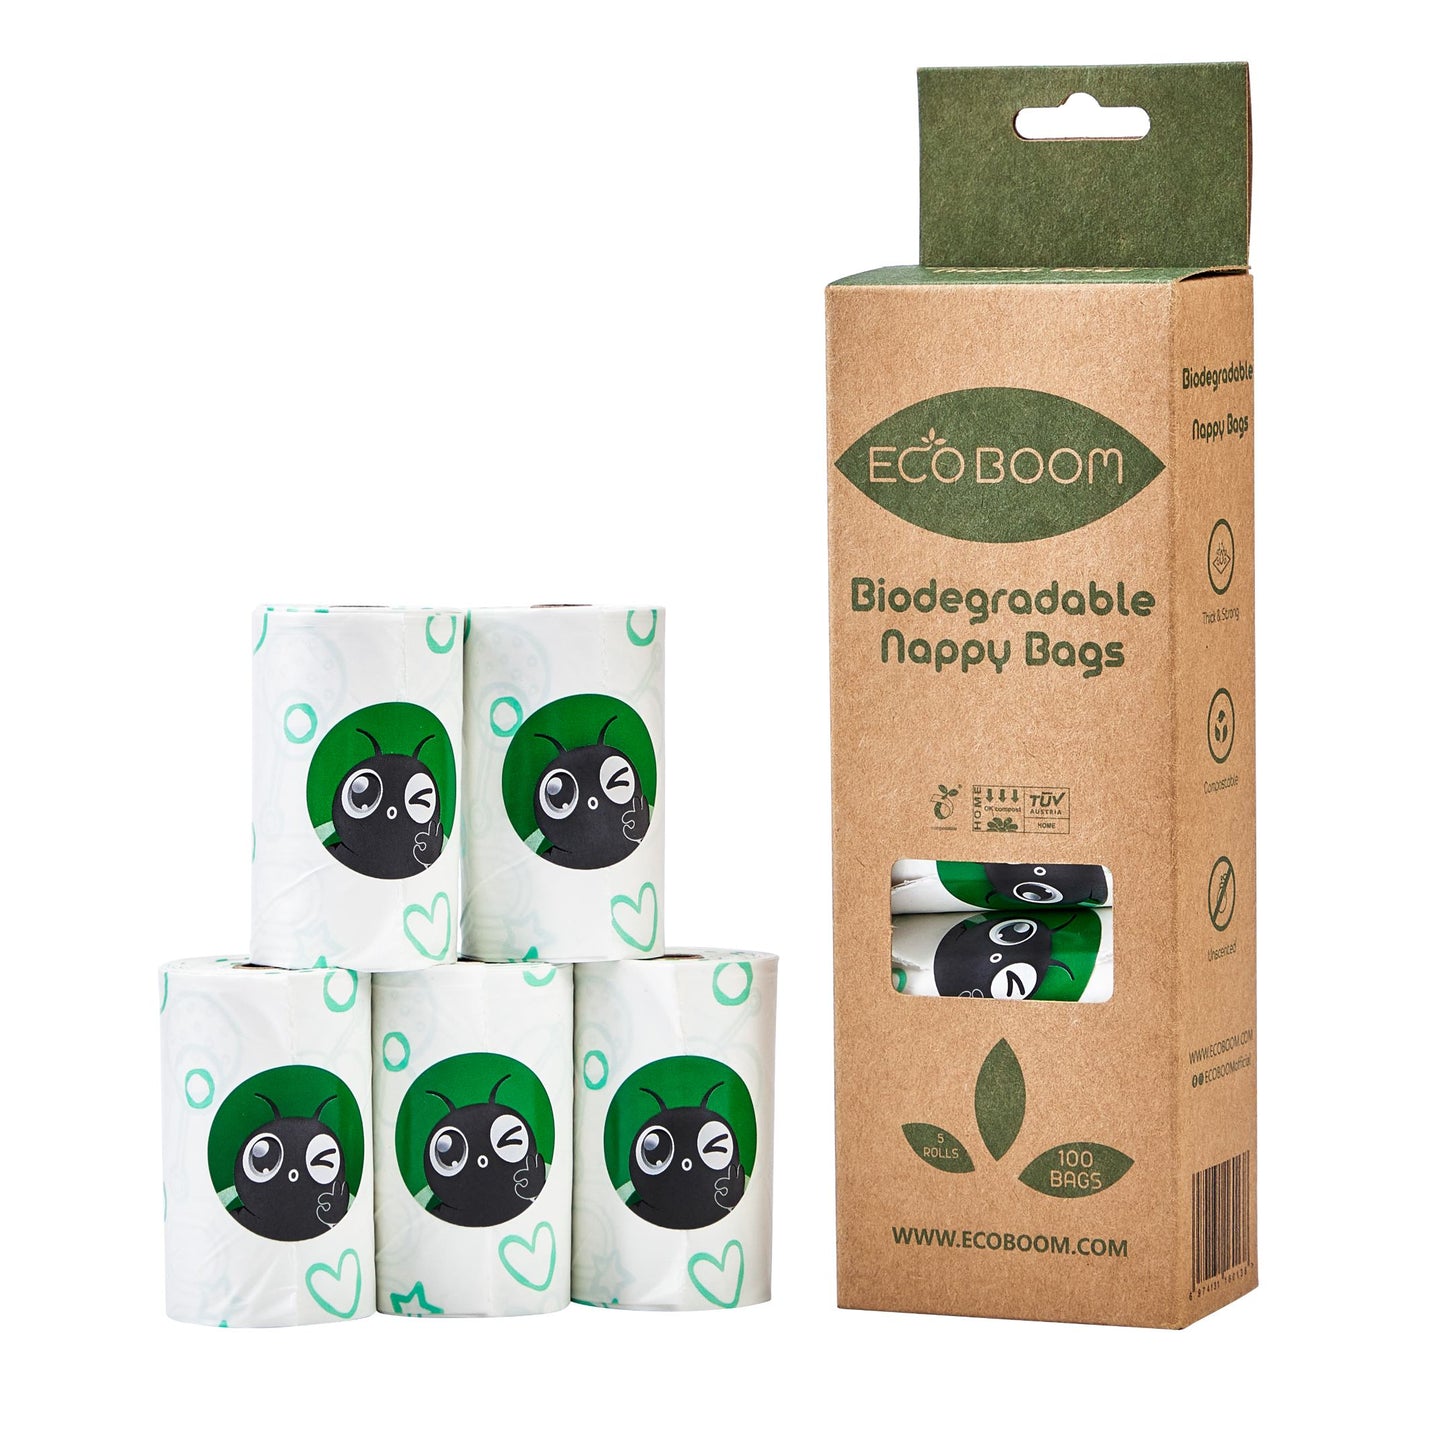 Biodegradable Nappy Bags (100)